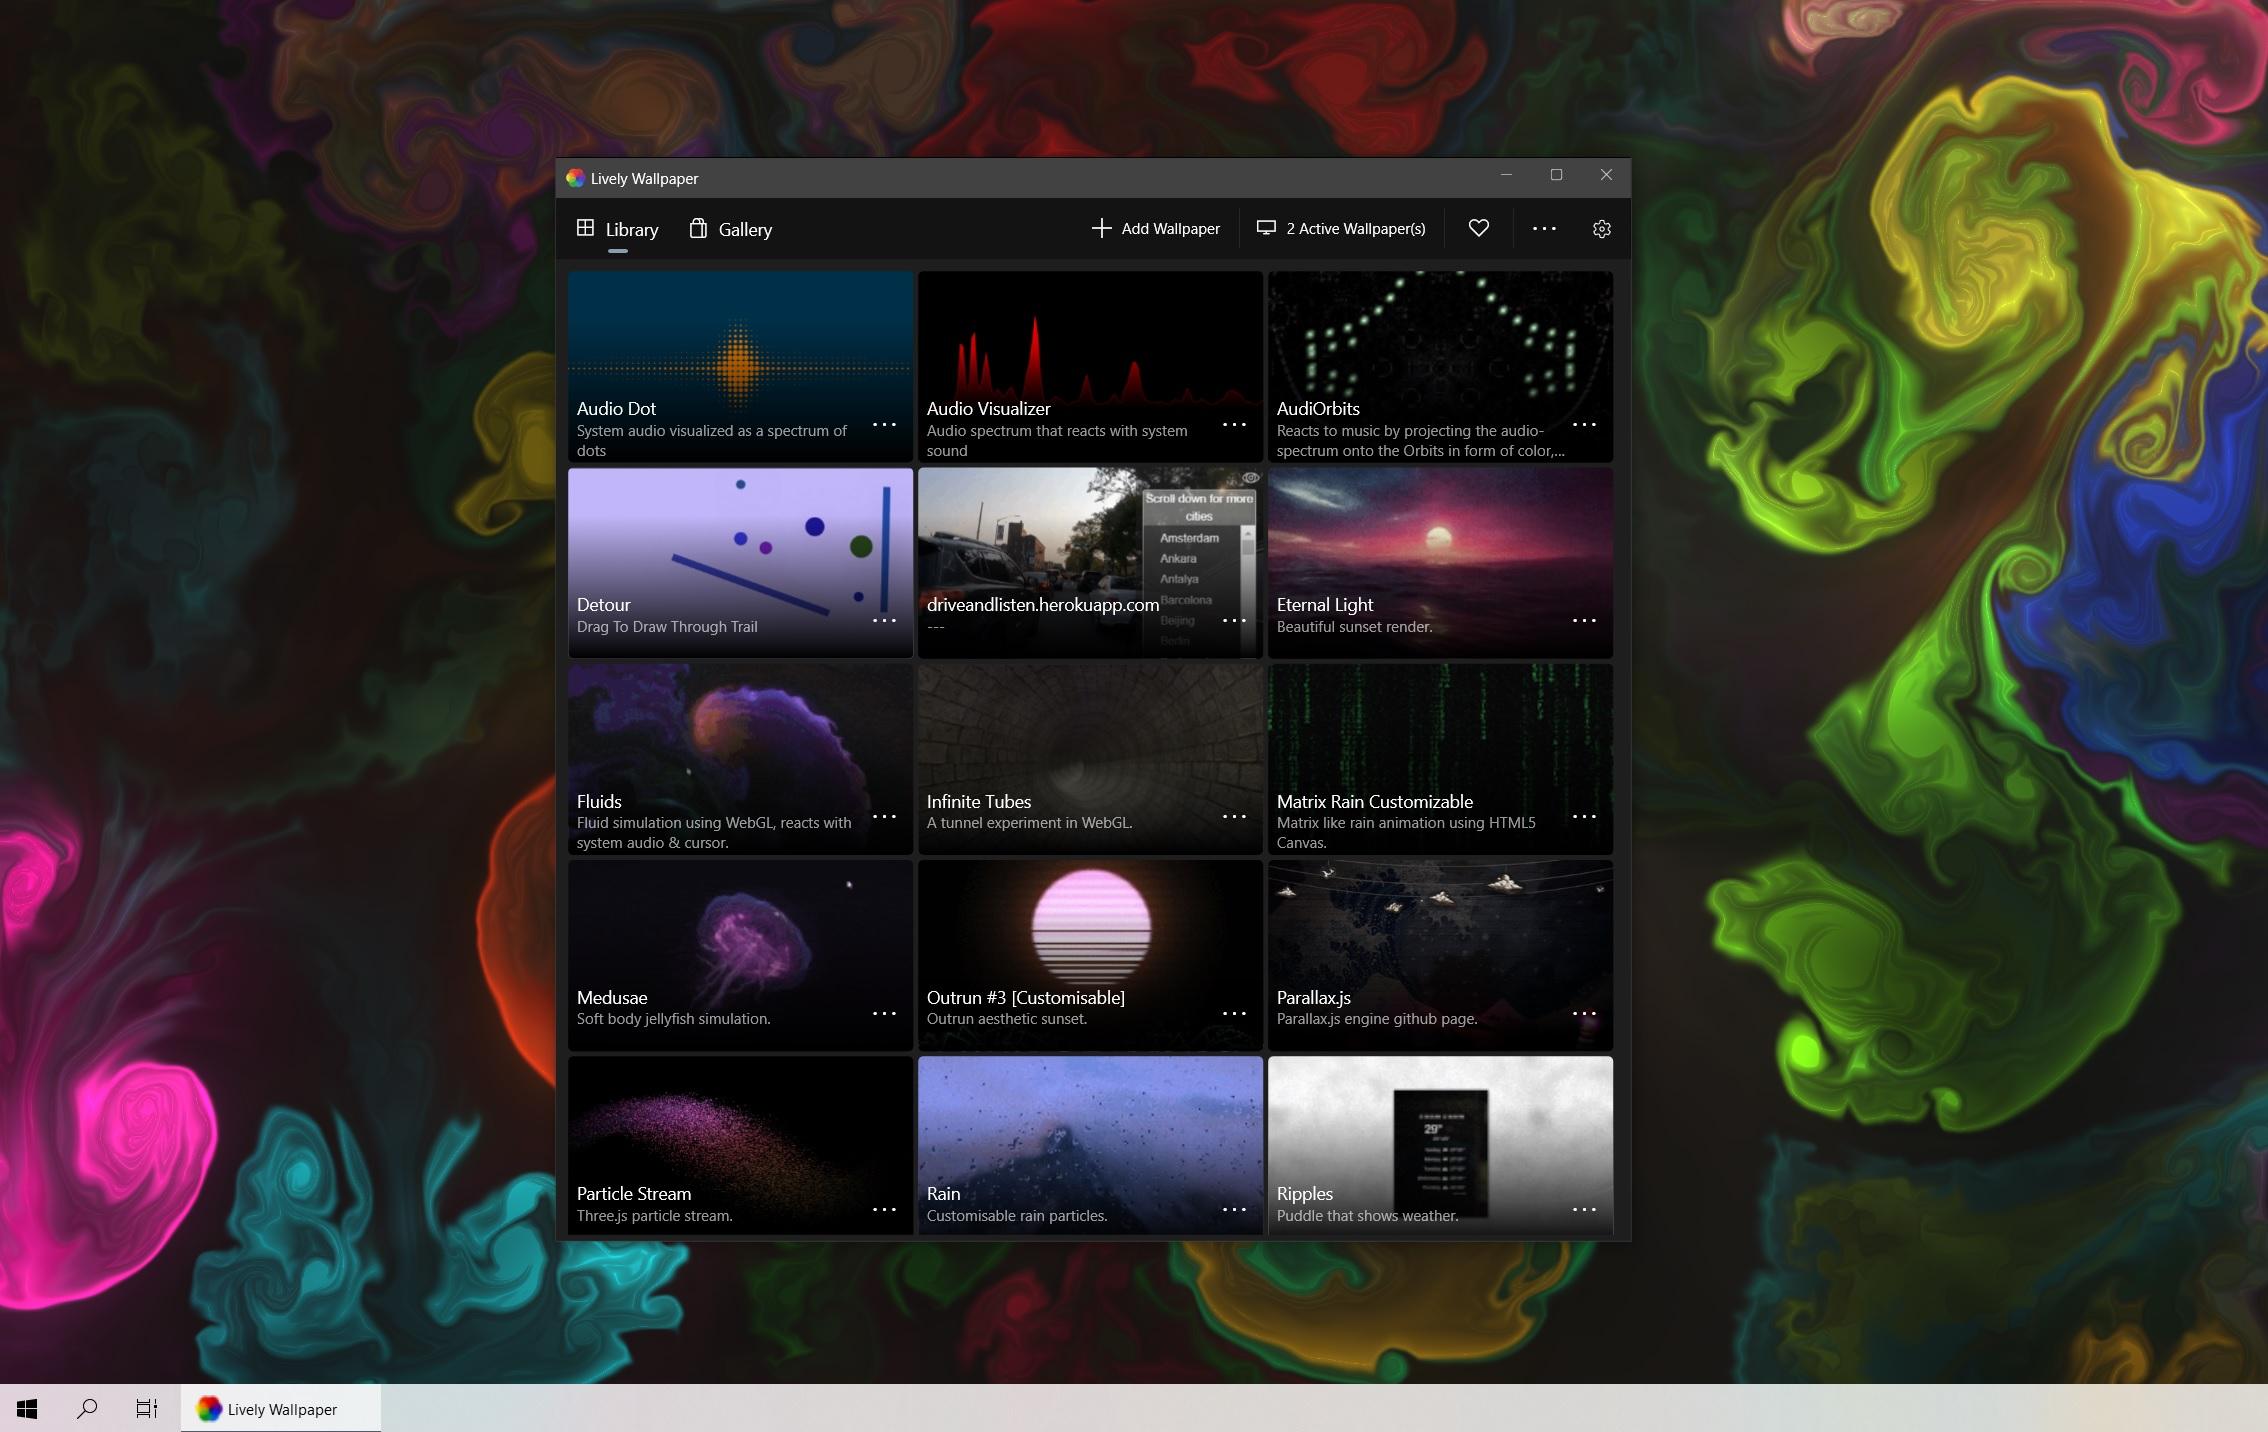 This Windows Wallpaper App Gives Your Desktop Superpowers